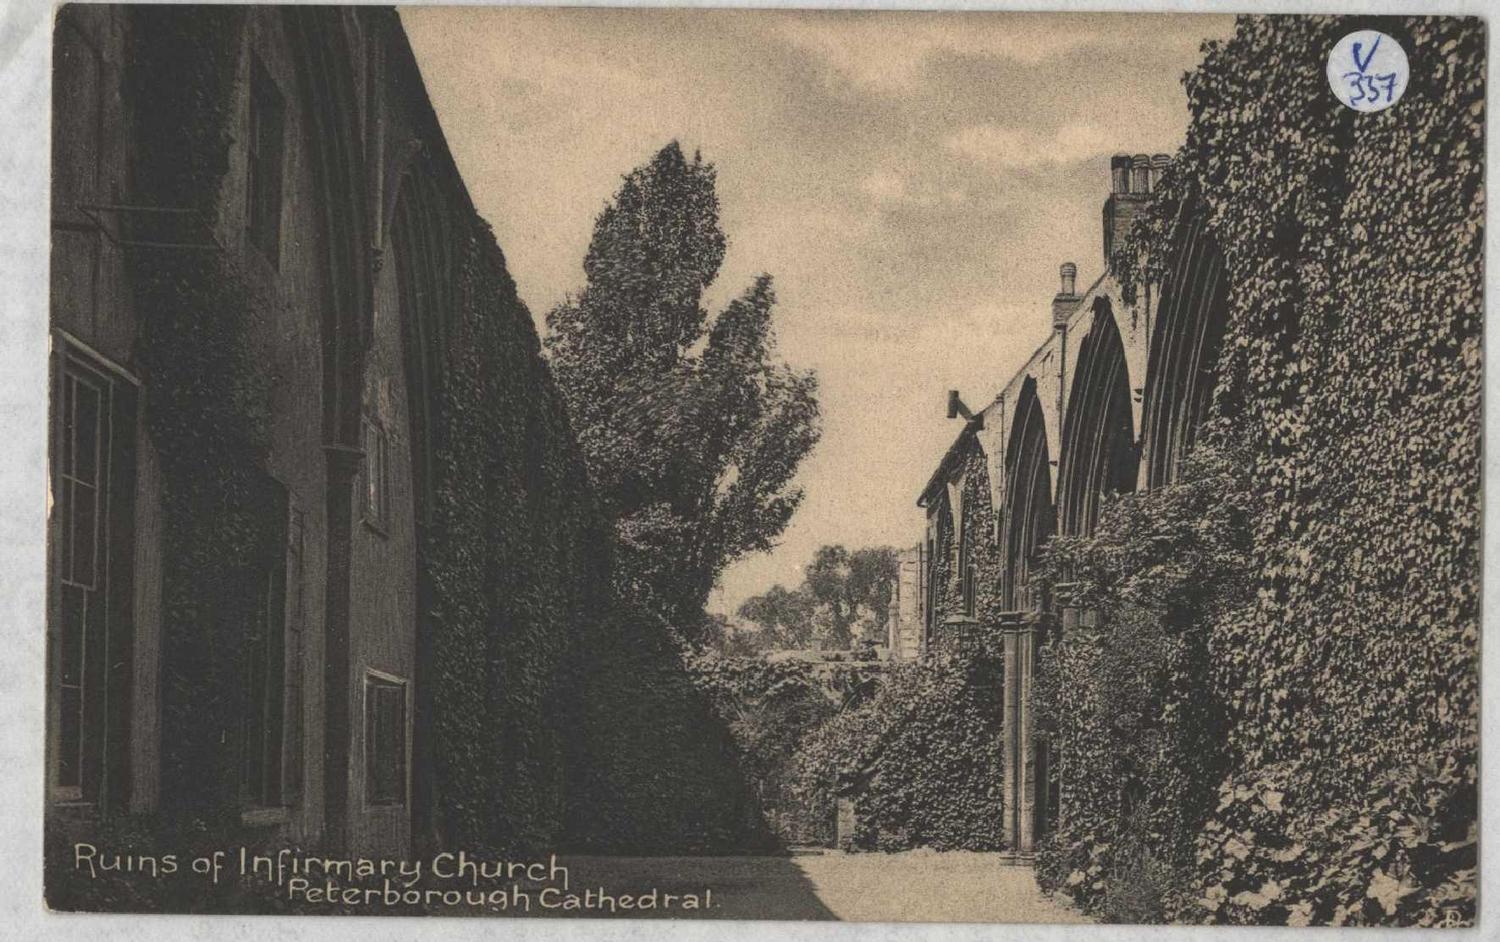 Peterborough Cathedral, the ruins of the infirmary and monastic buildings. Postcard, late 19th to early 20th century,